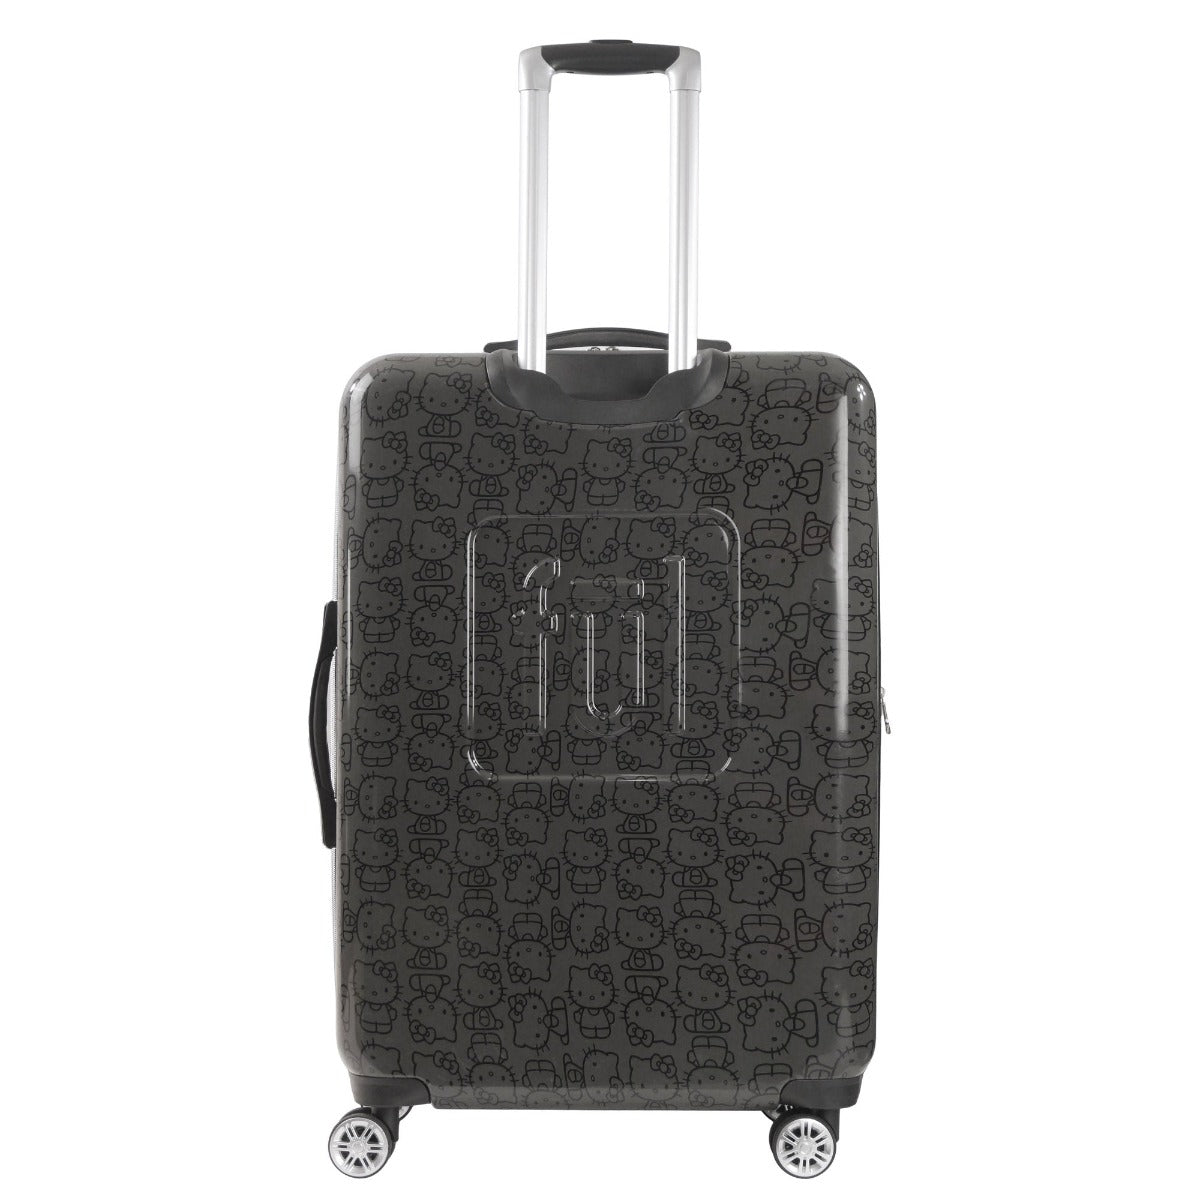 Hello Kitty Pose All Over Print 29.5 inch Hardsided Luggage Black checked spinner suitcase